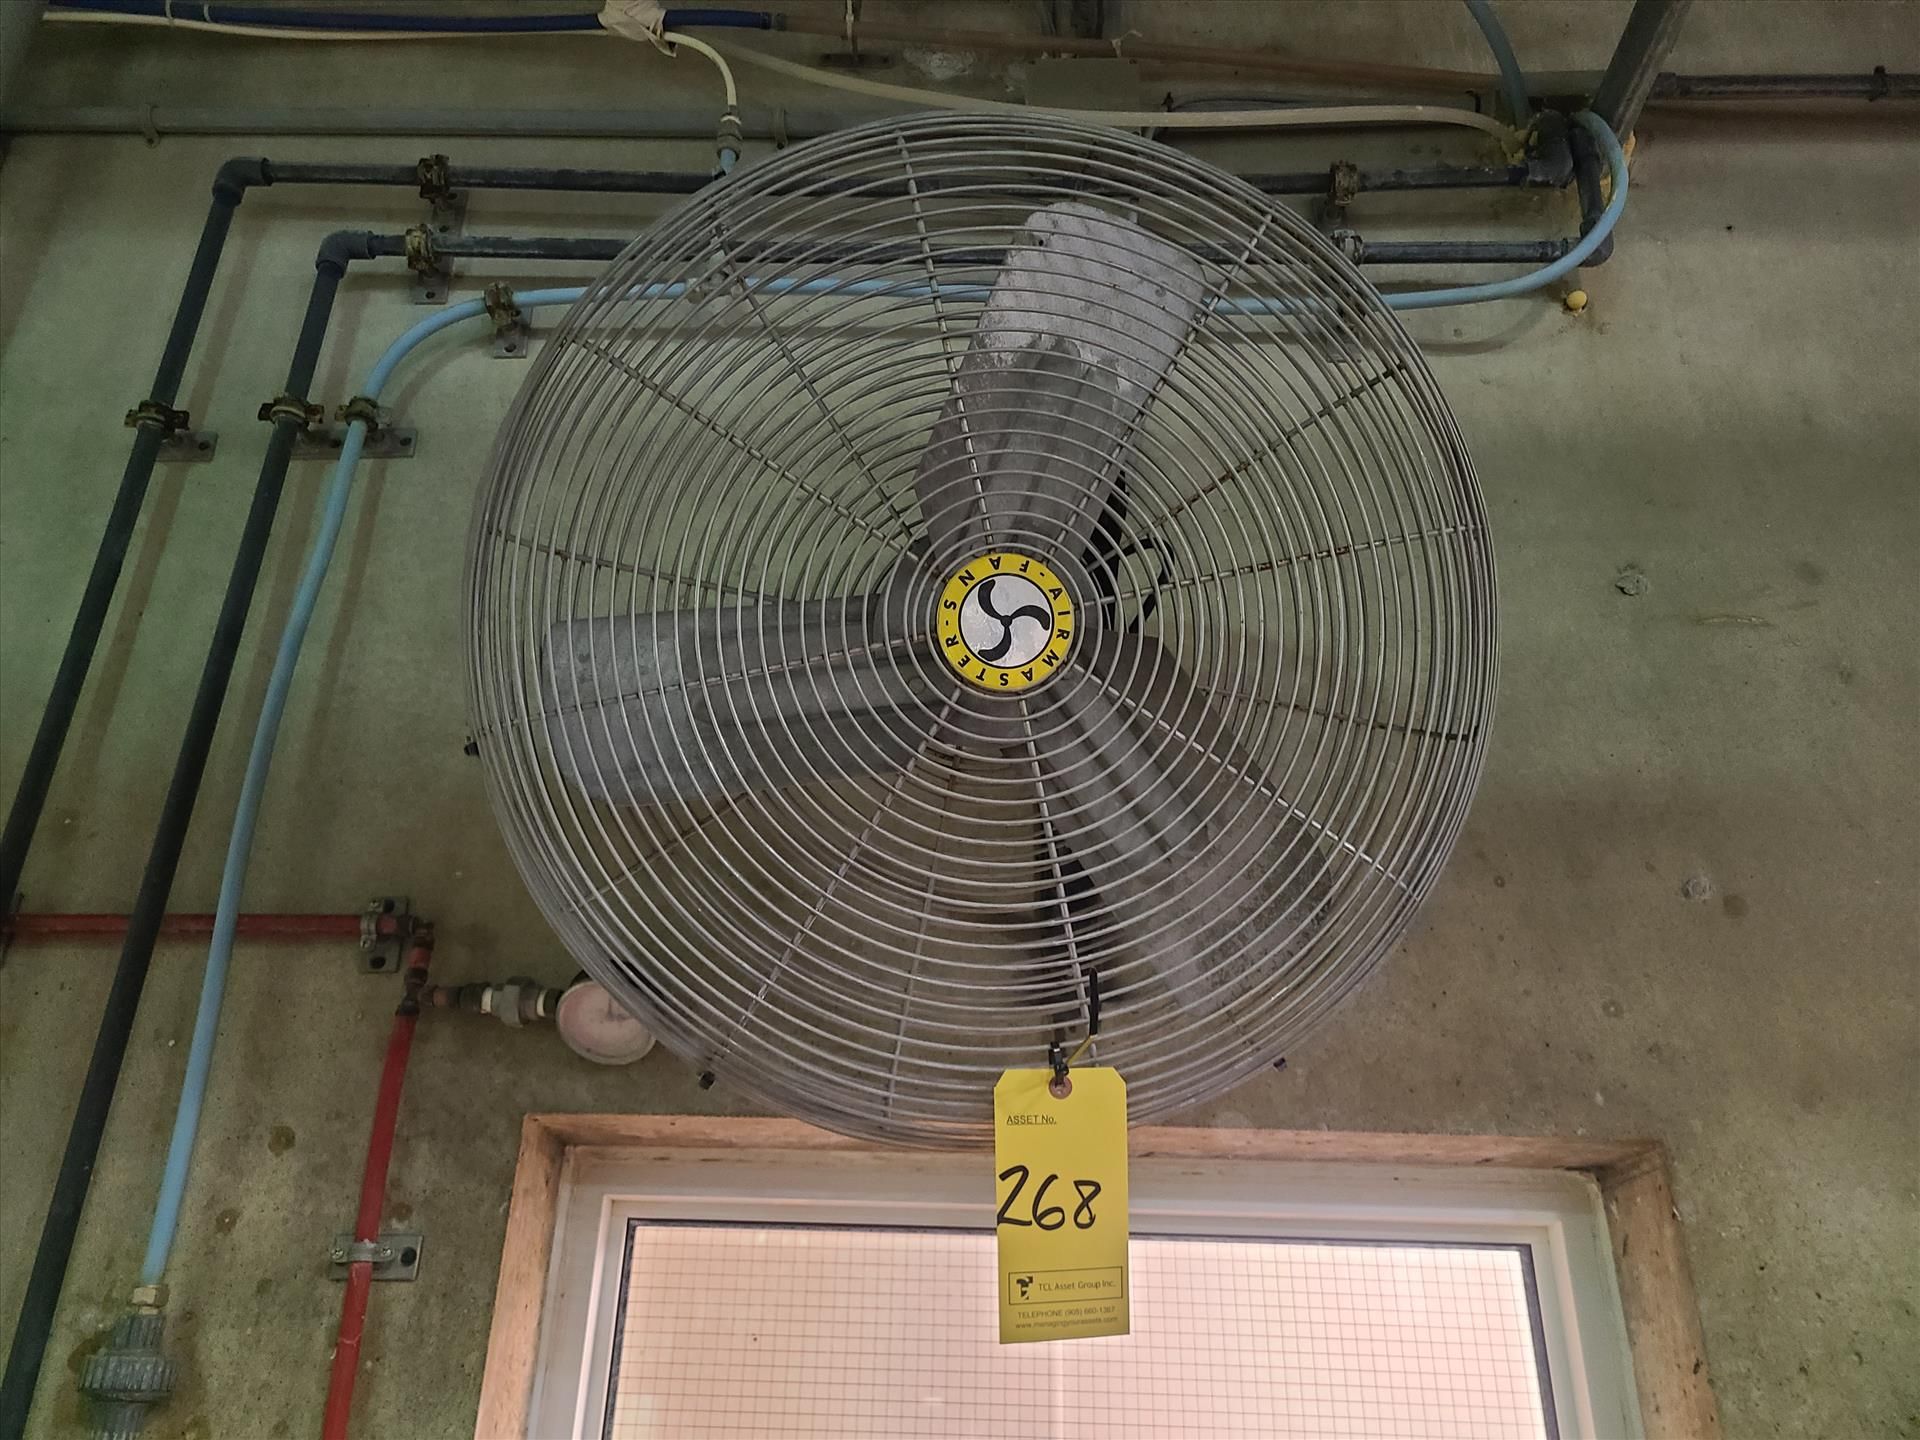 AirMaster wall fan, approx. 28 in. dia. [Production]